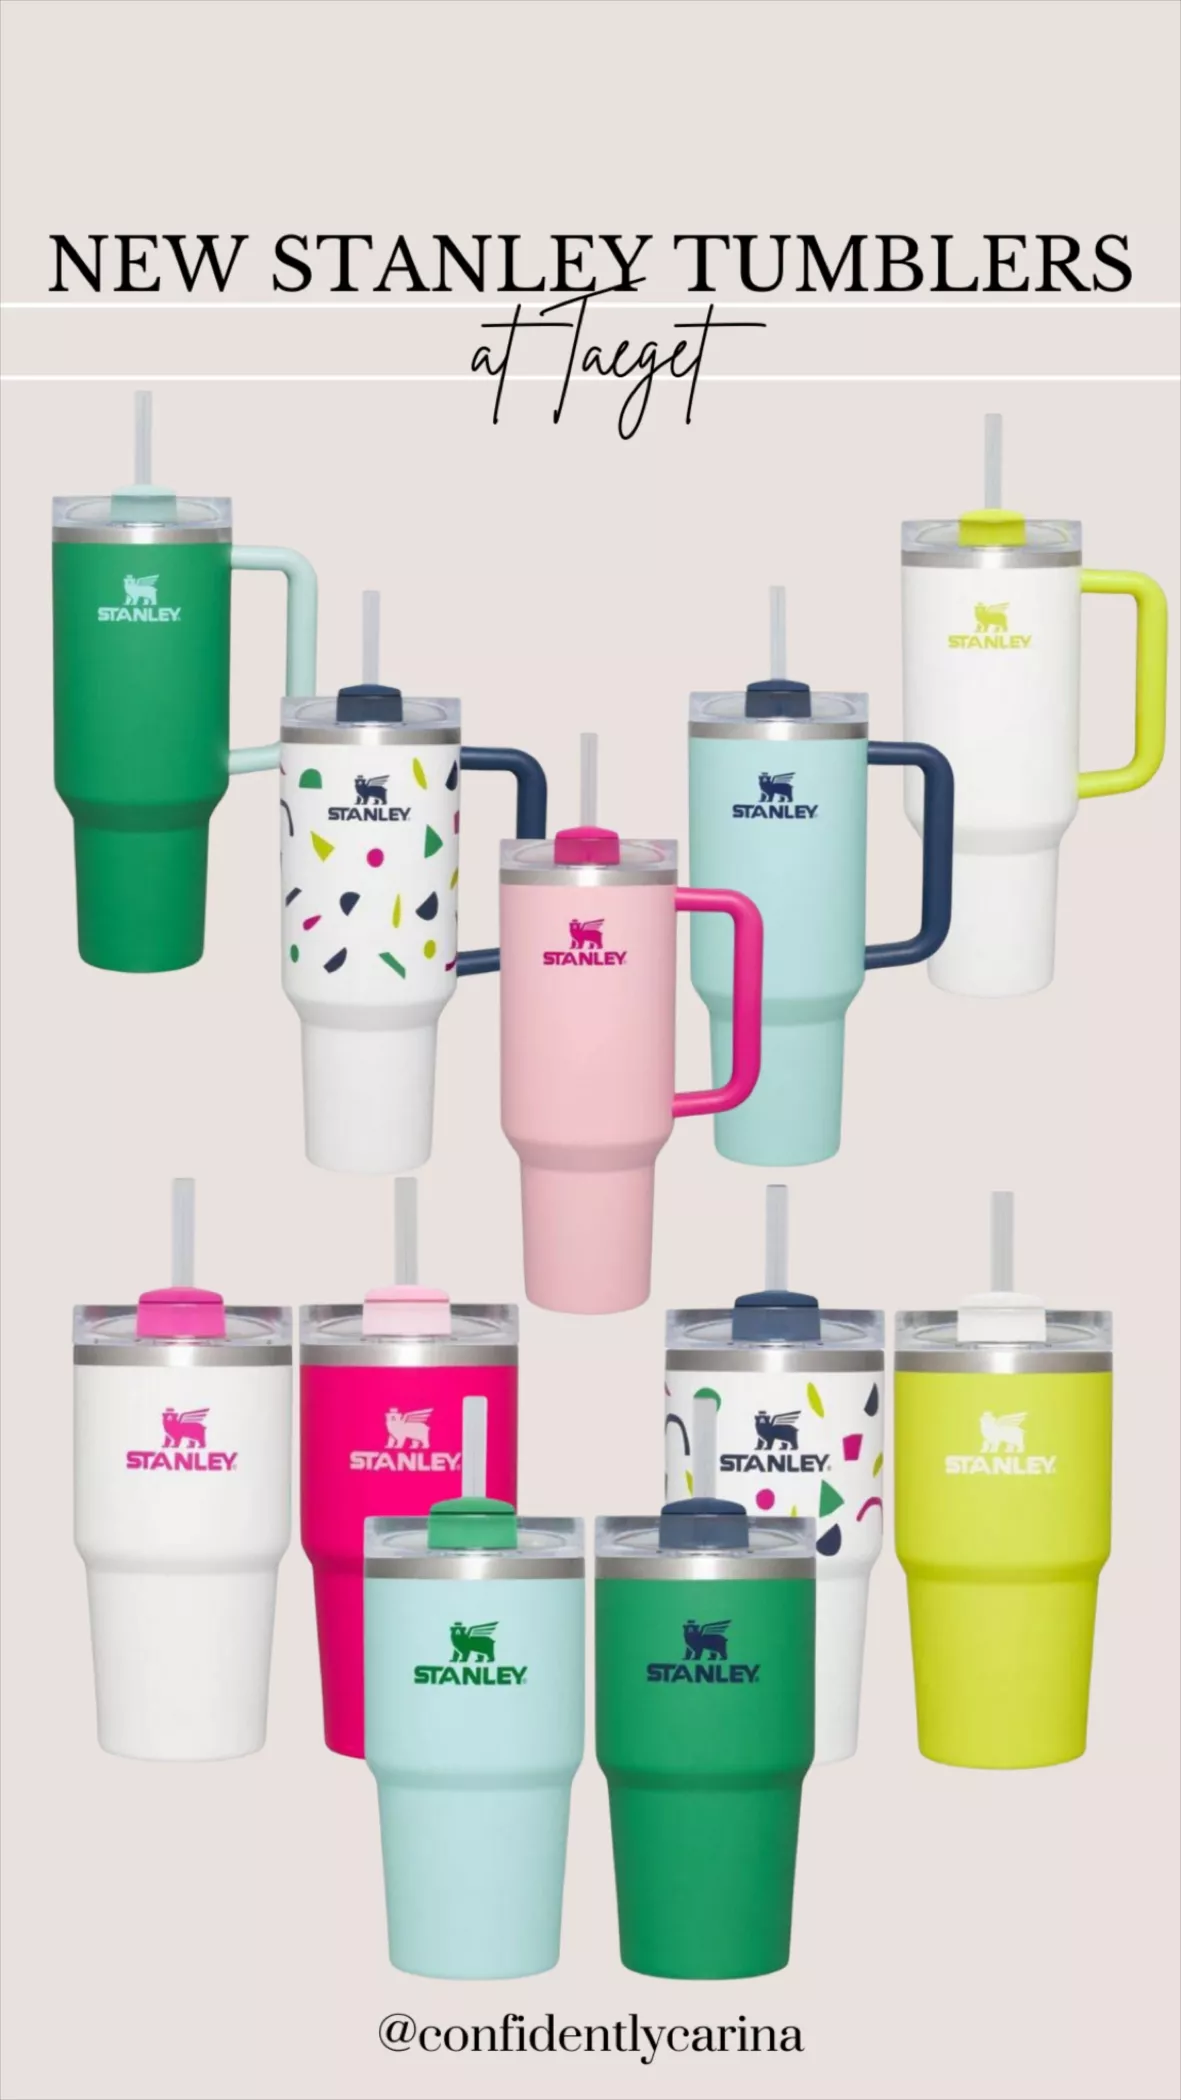 Today only: Take 25% off select Stanley tumblers at Target - Clark